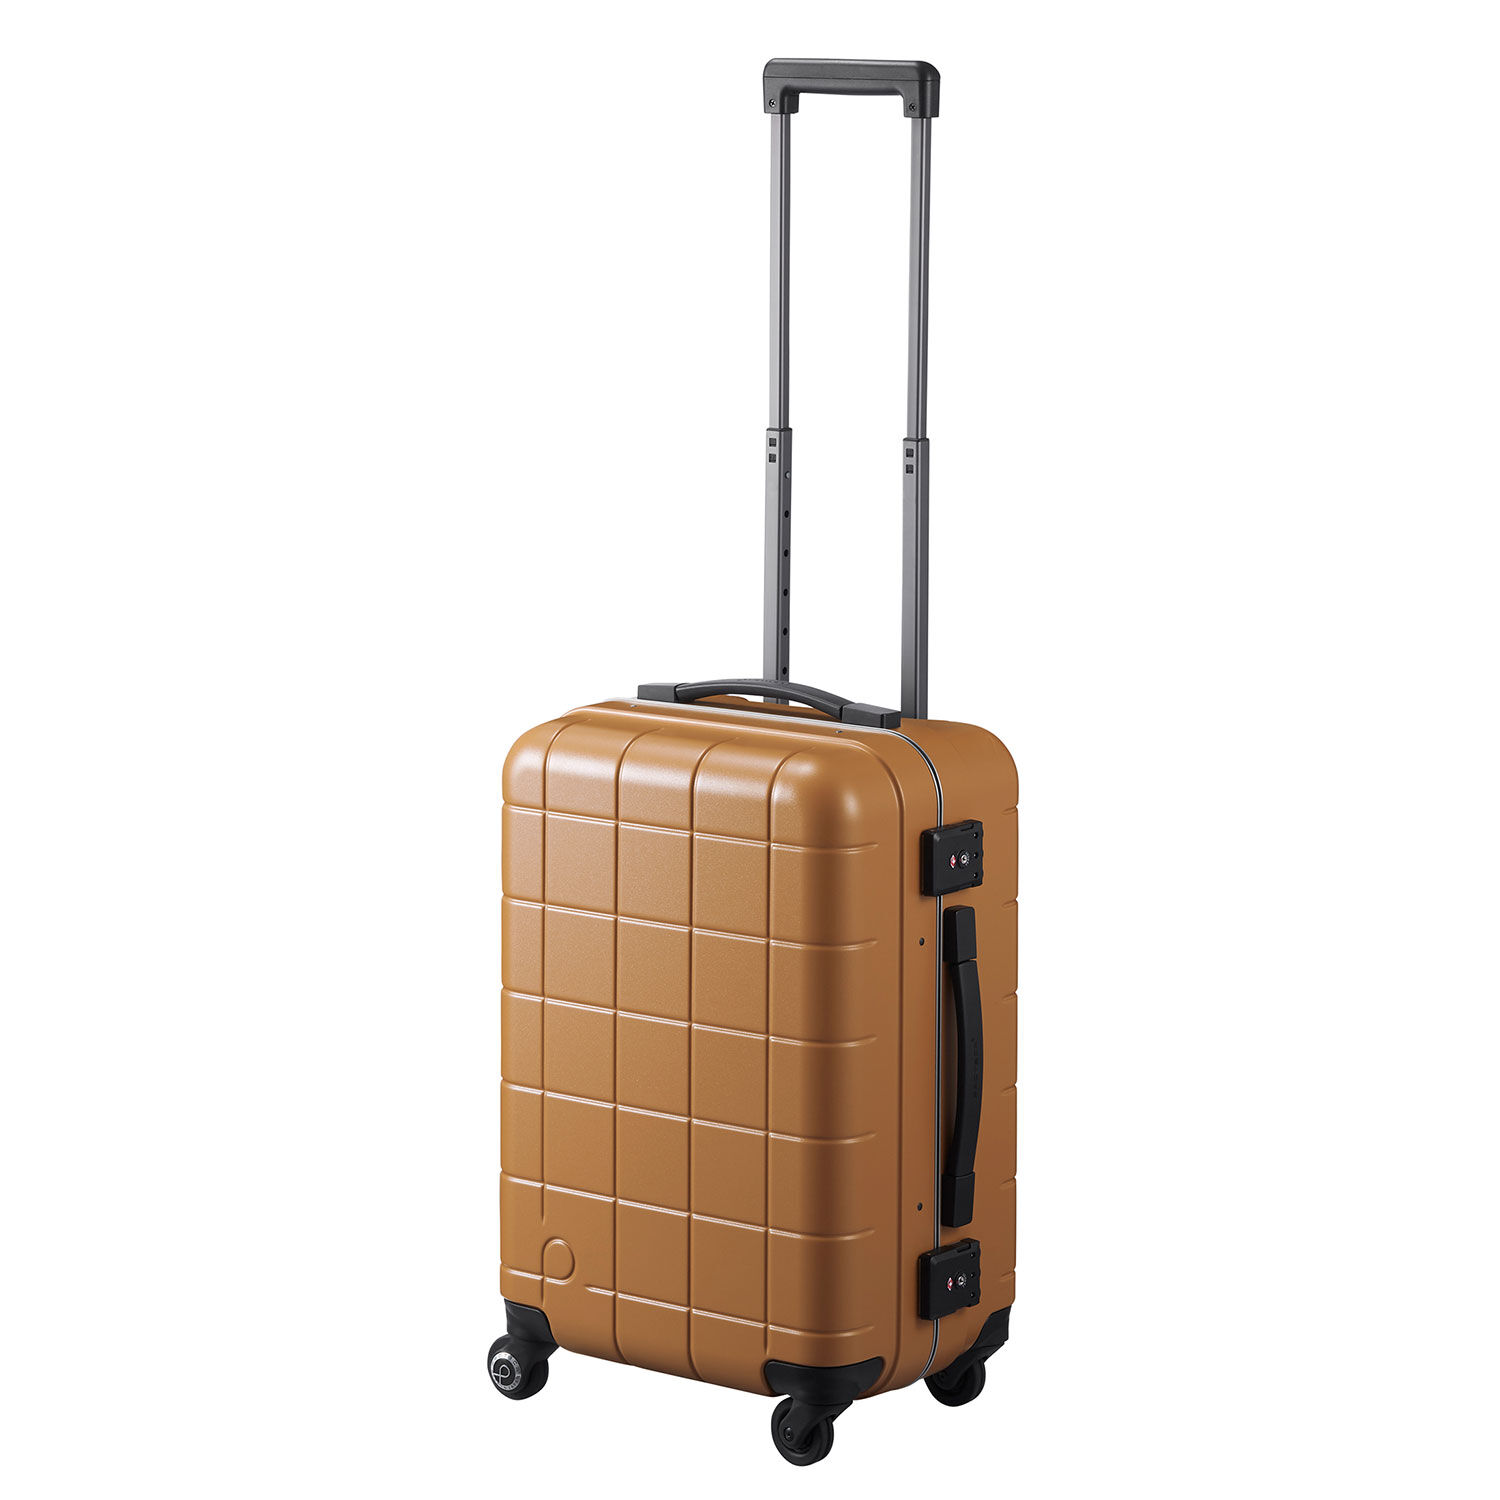 Proteca Luggage Made in Japan | ACE Official Online Store